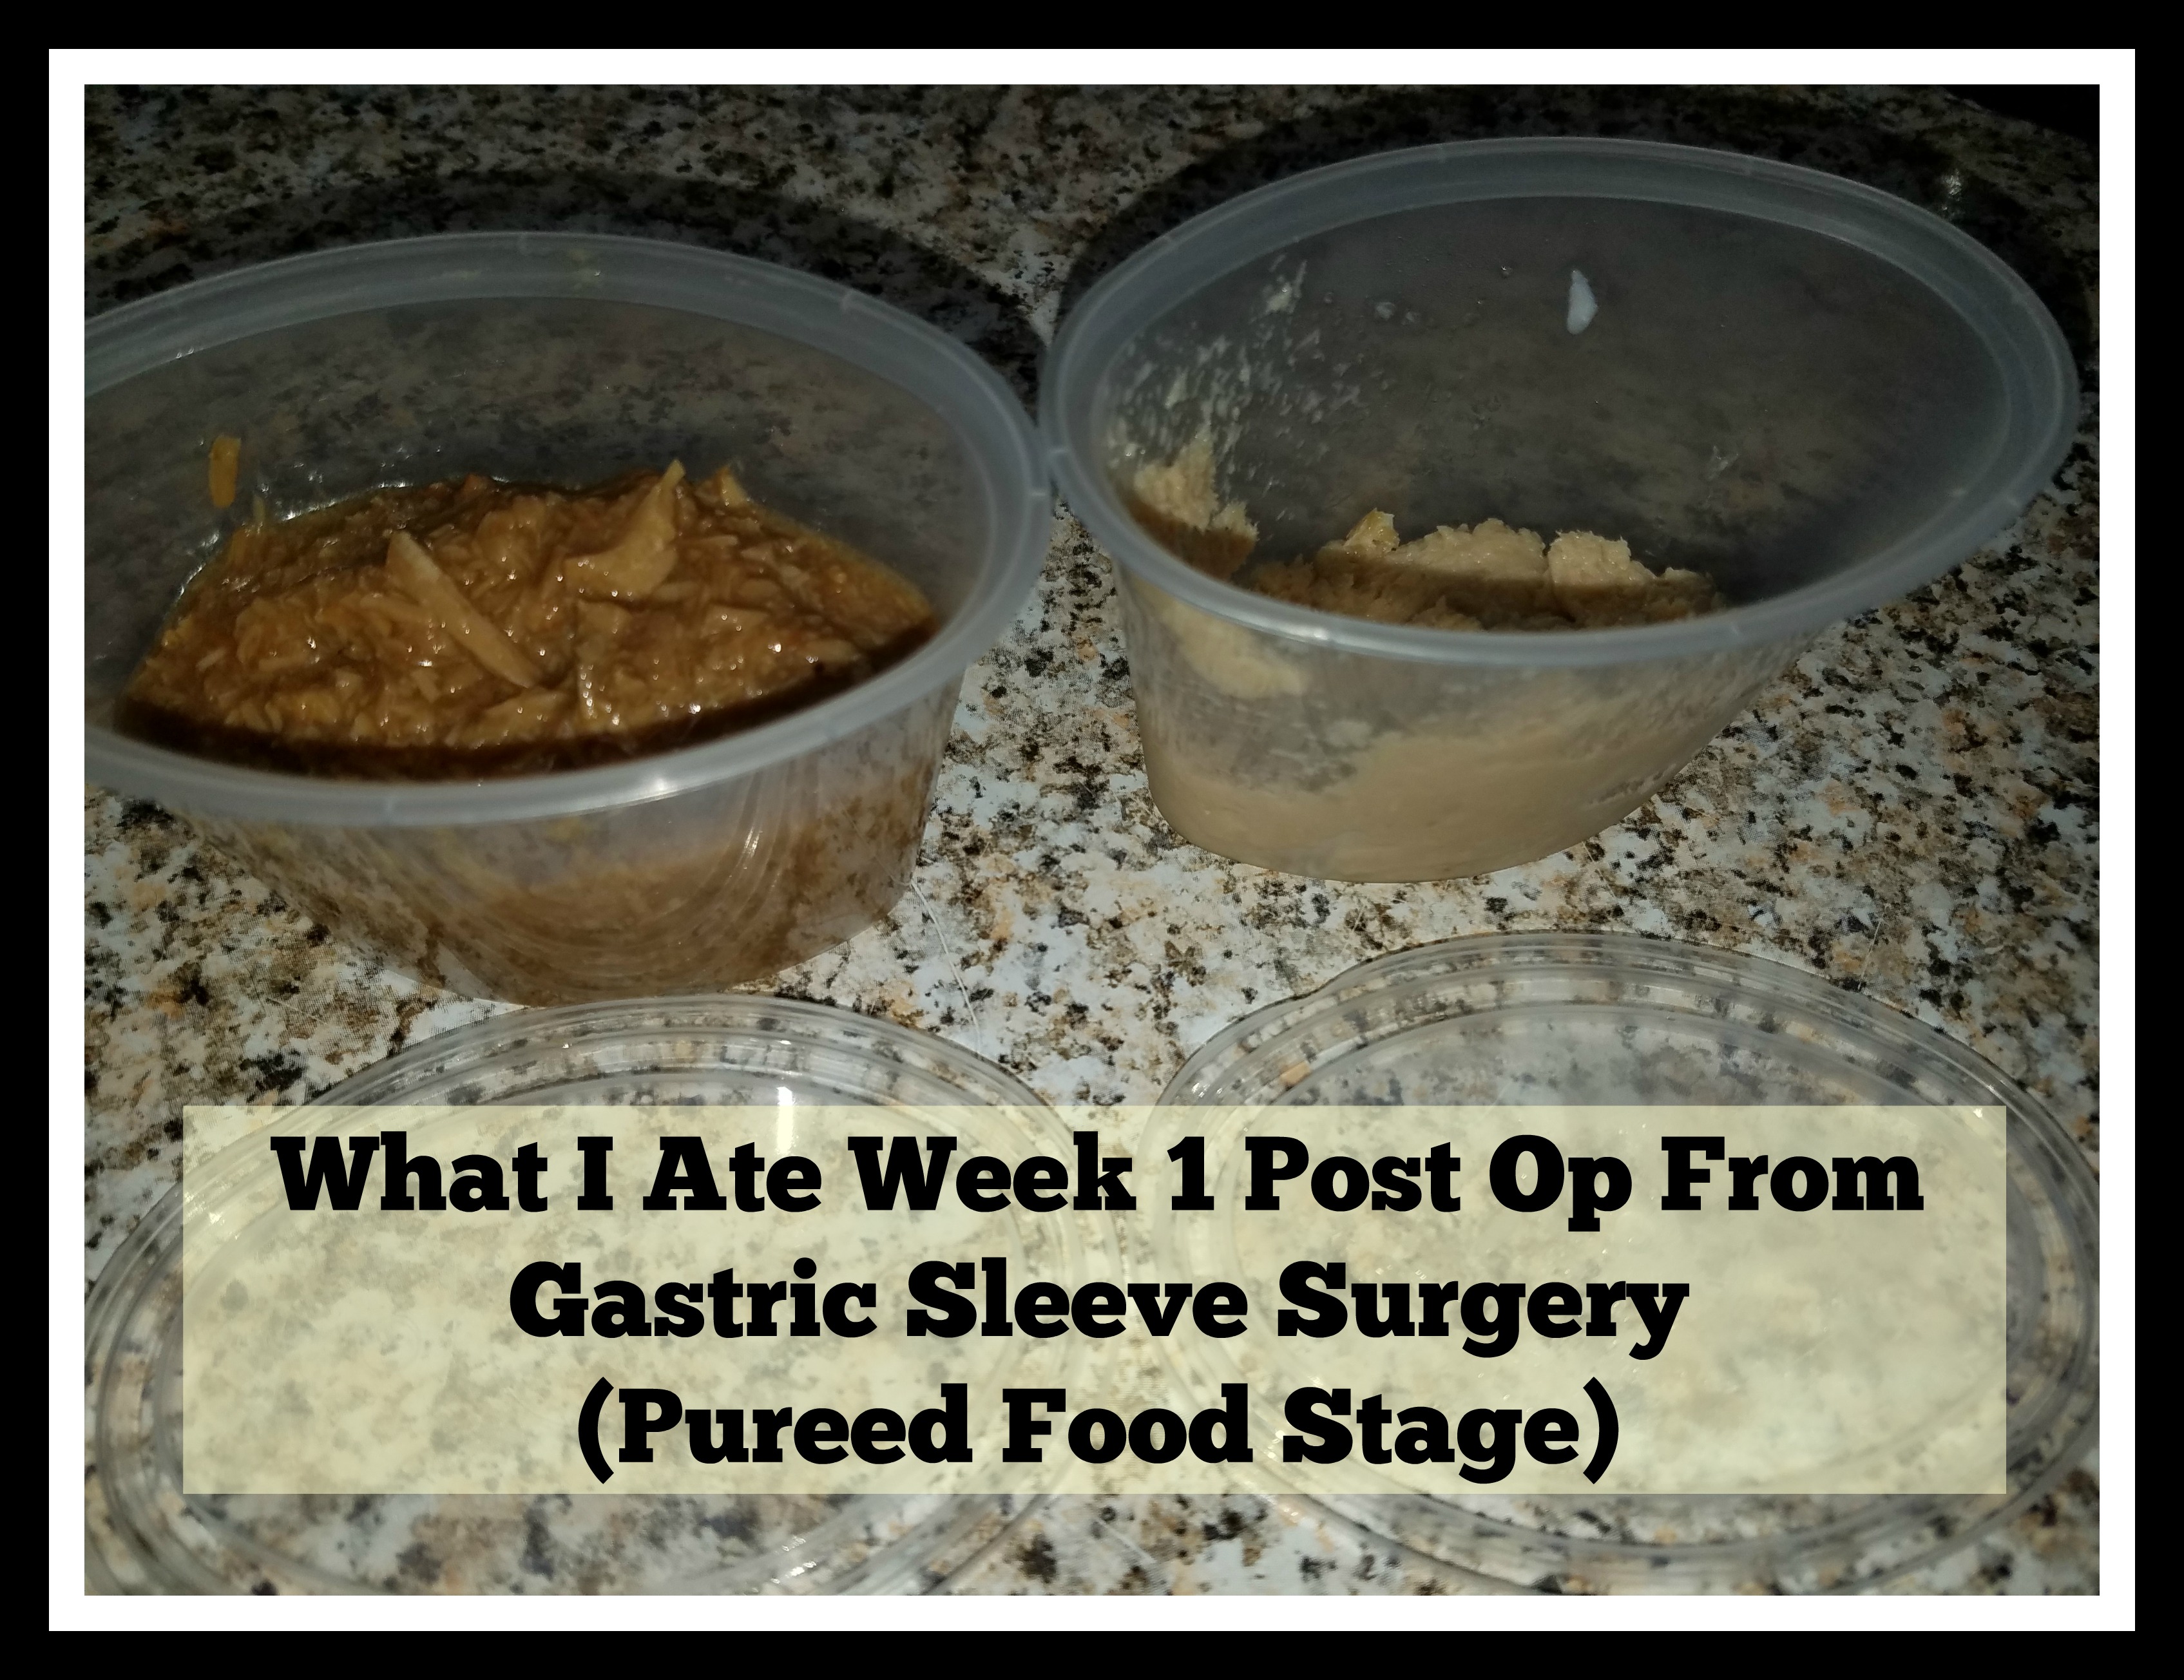 What I Ate and Drank Week 1 and 2 Post Op From Gastric Sleeve Surgery